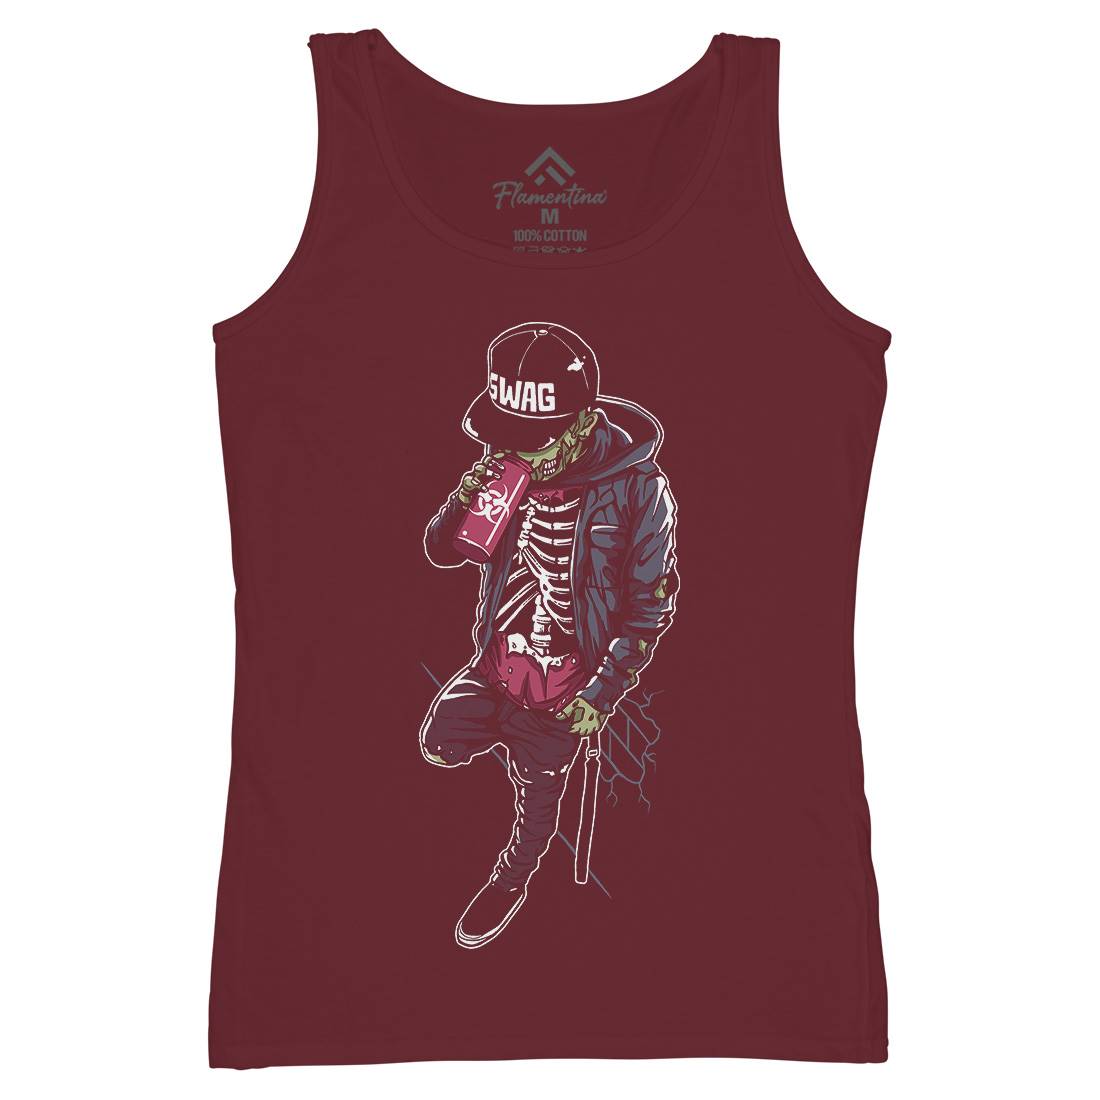 Zombie Swag Womens Organic Tank Top Vest Horror A600